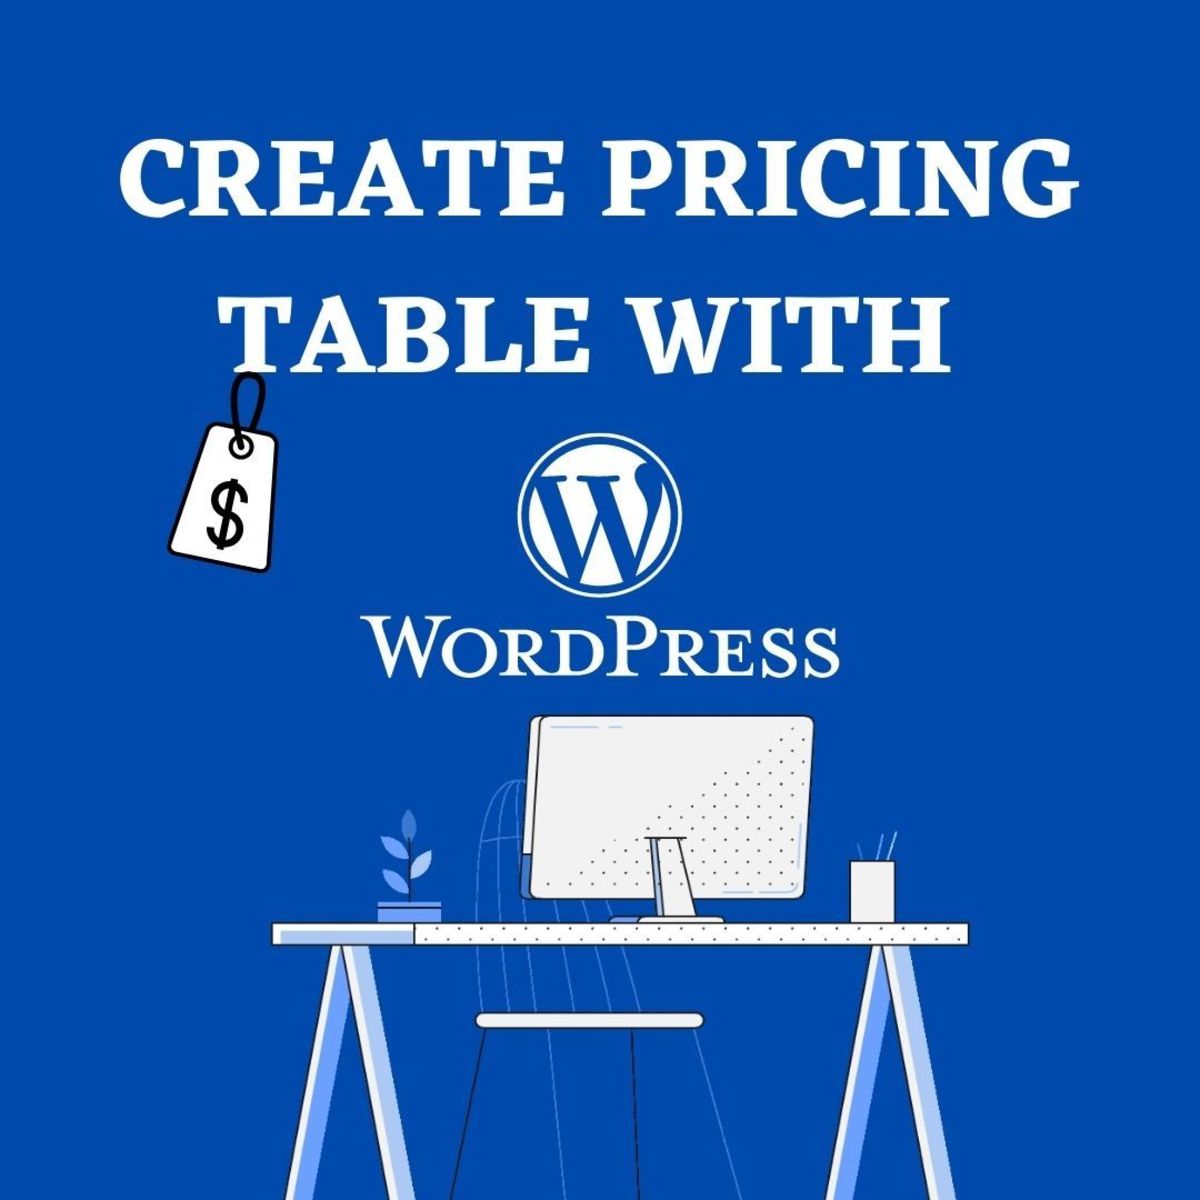 How to Create a Pricing Table With WordPress? a Step by Step Guide